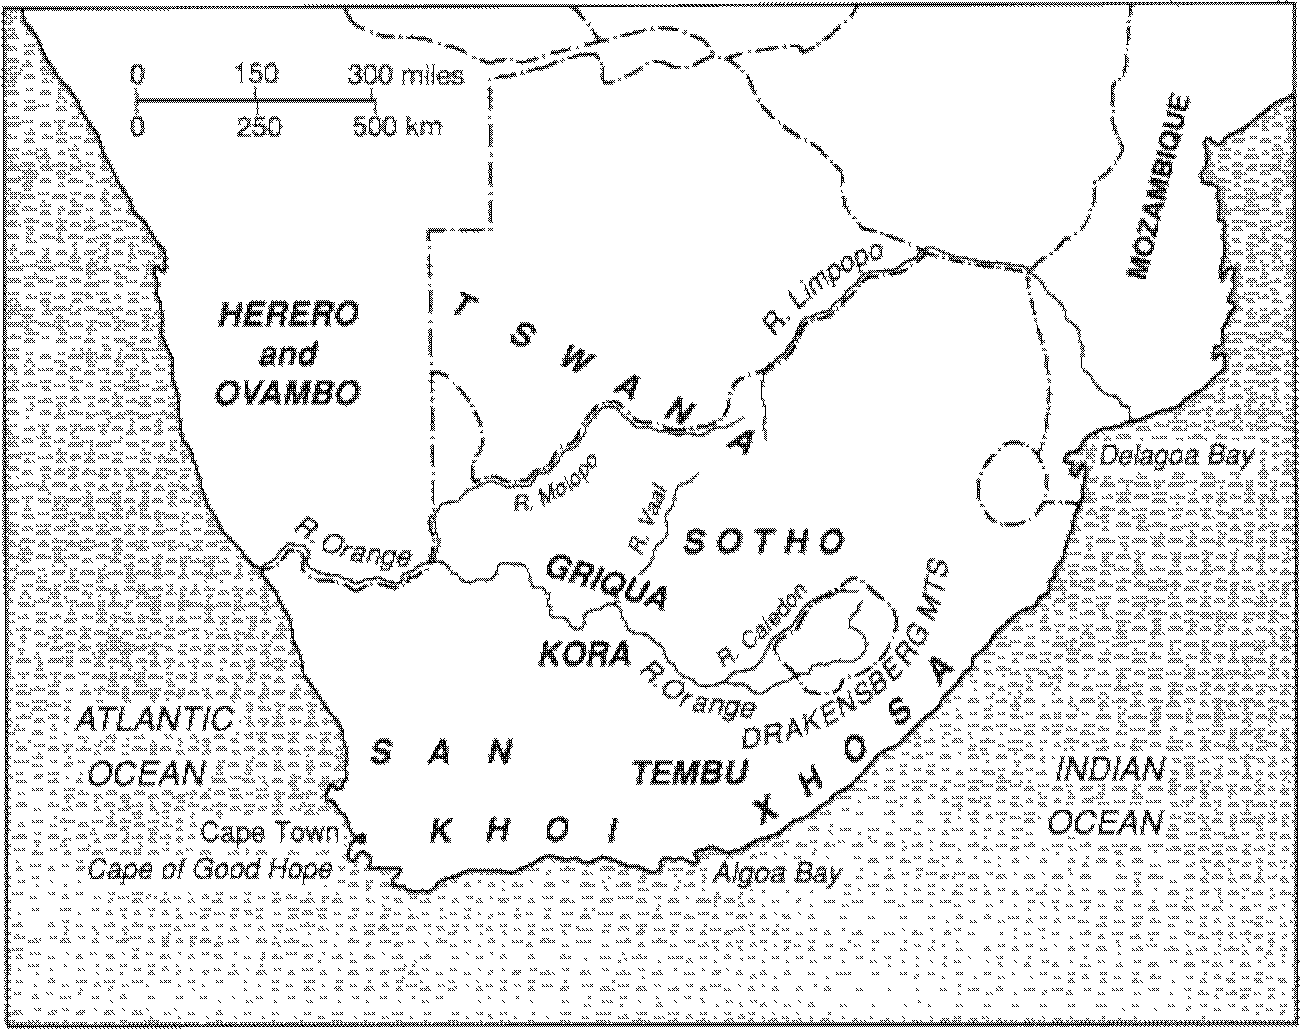 Southern Africa in the sixteenth to eighteenth centuries.png